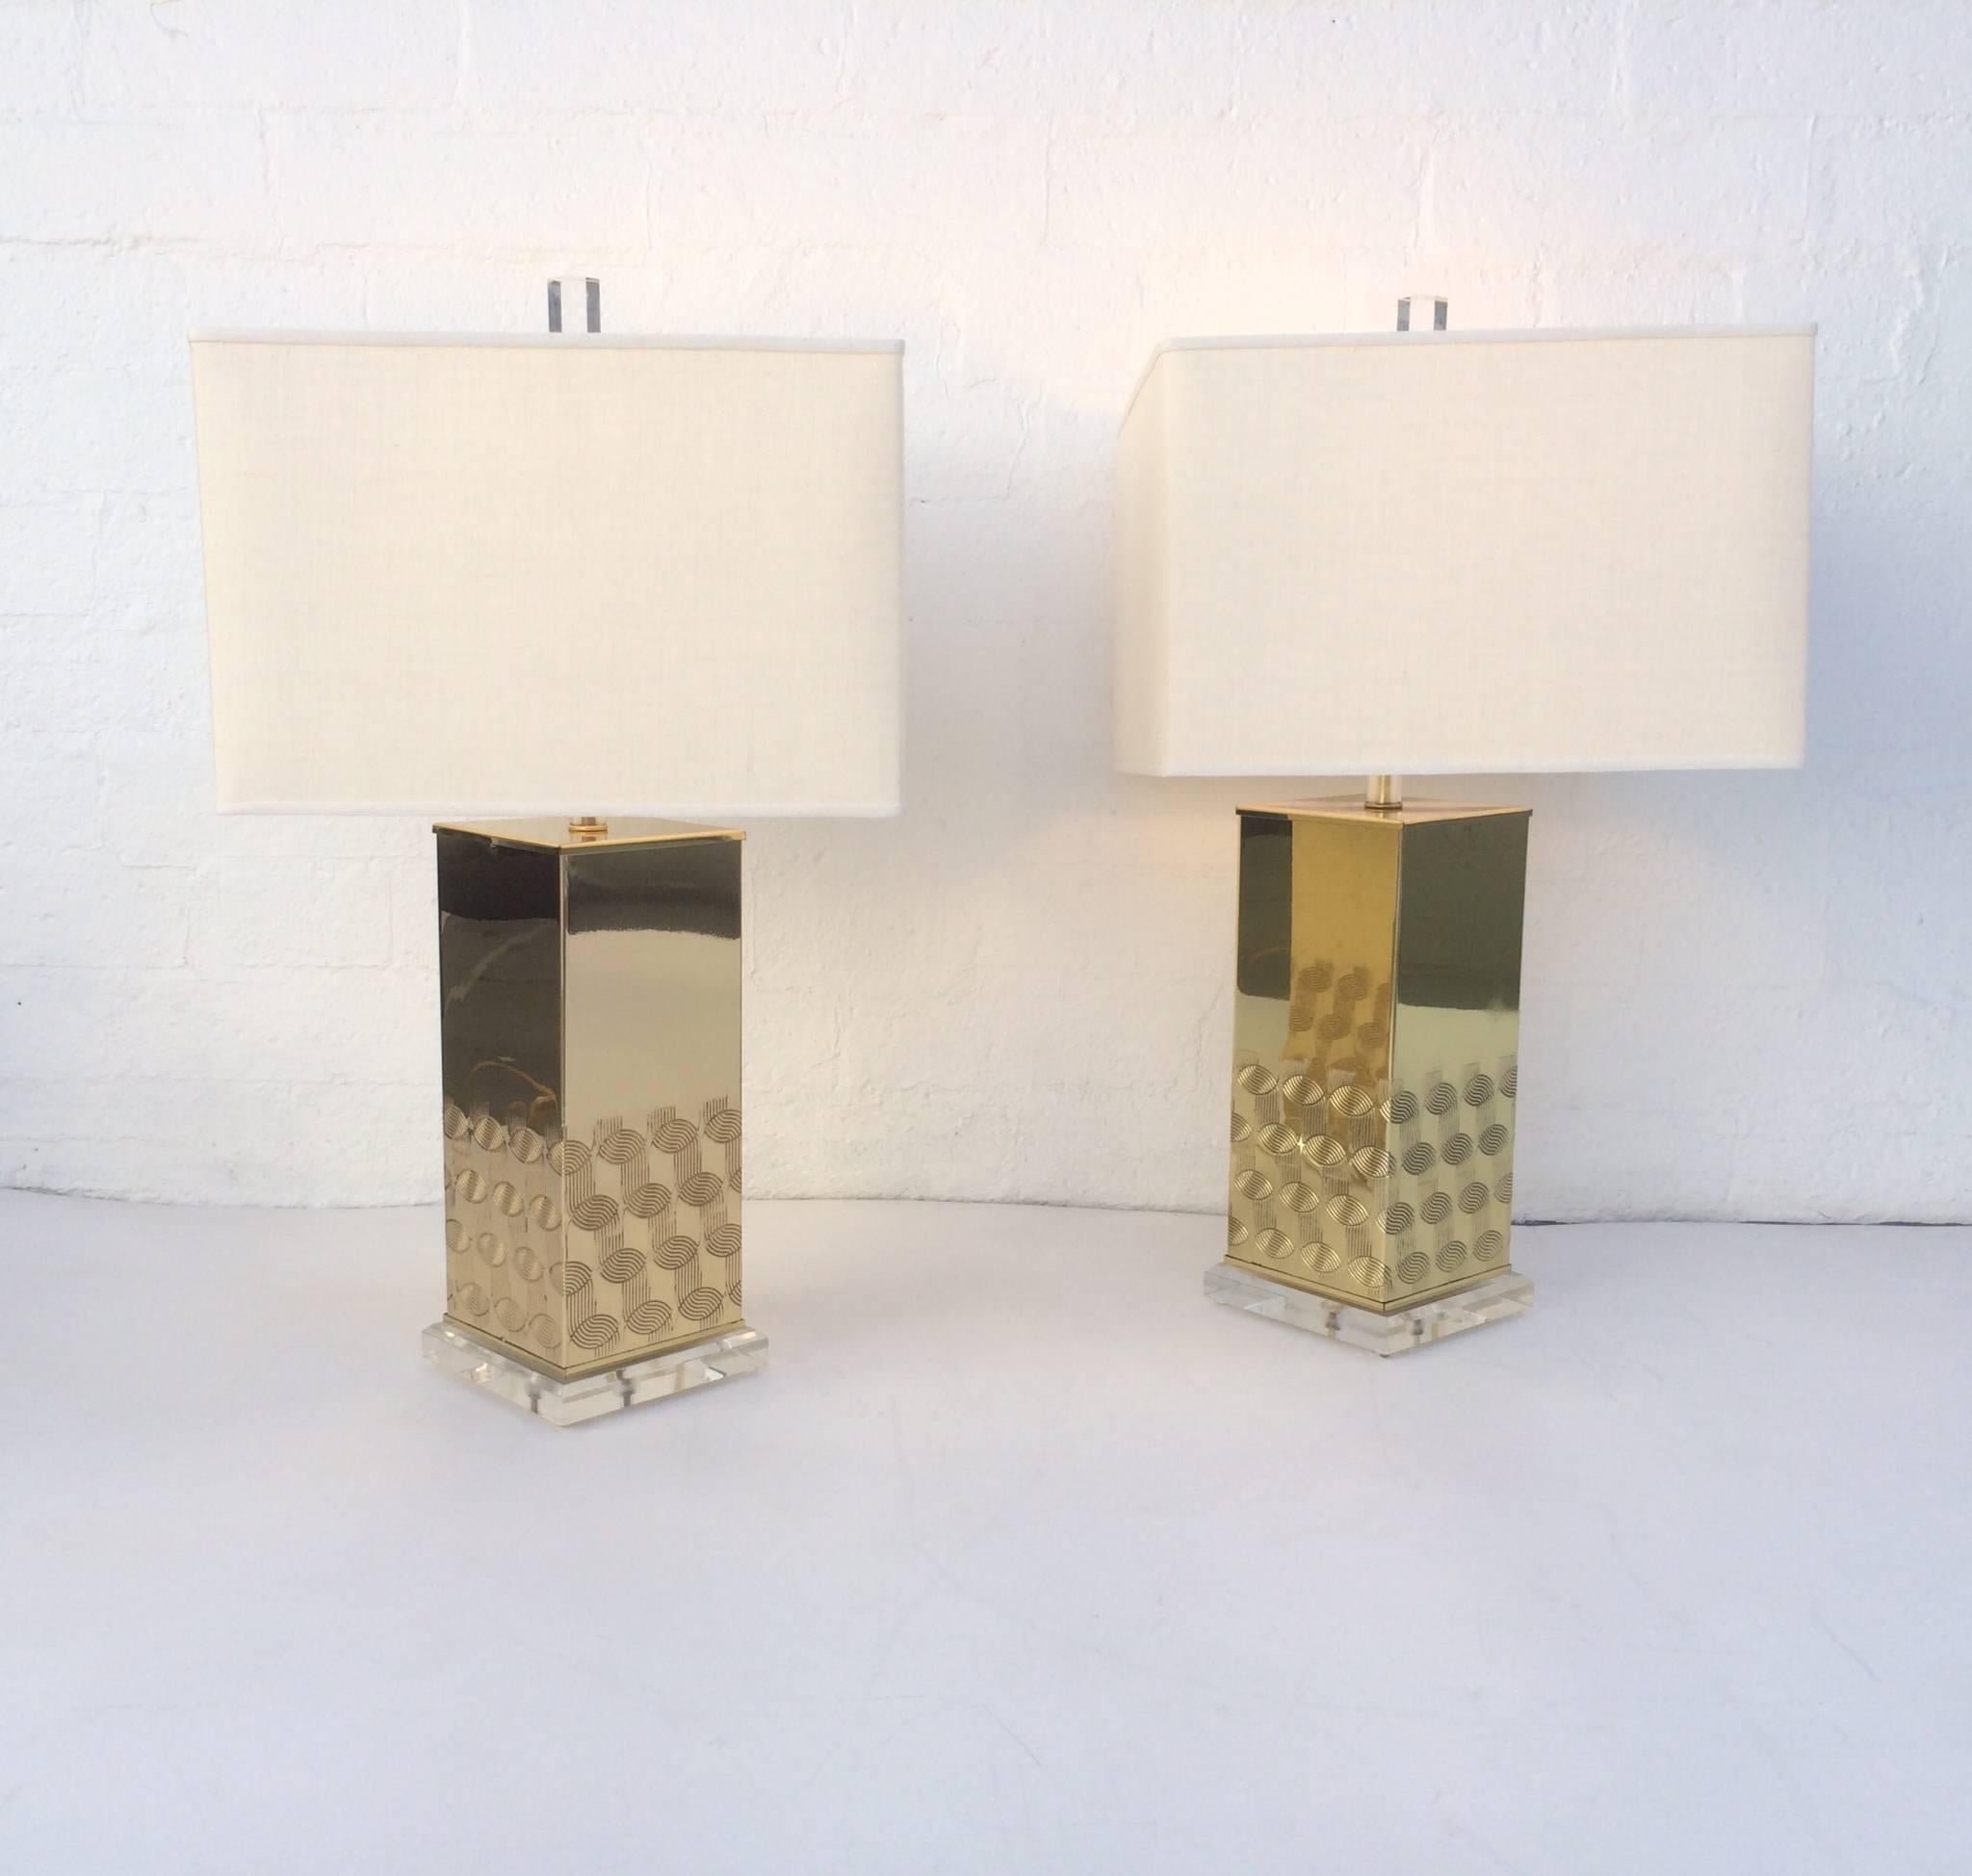 A pair of 1970s polished brass table lamps with acrylic bases and finials. All new brass hardware and newly re-wired. New vanilla linen shades.